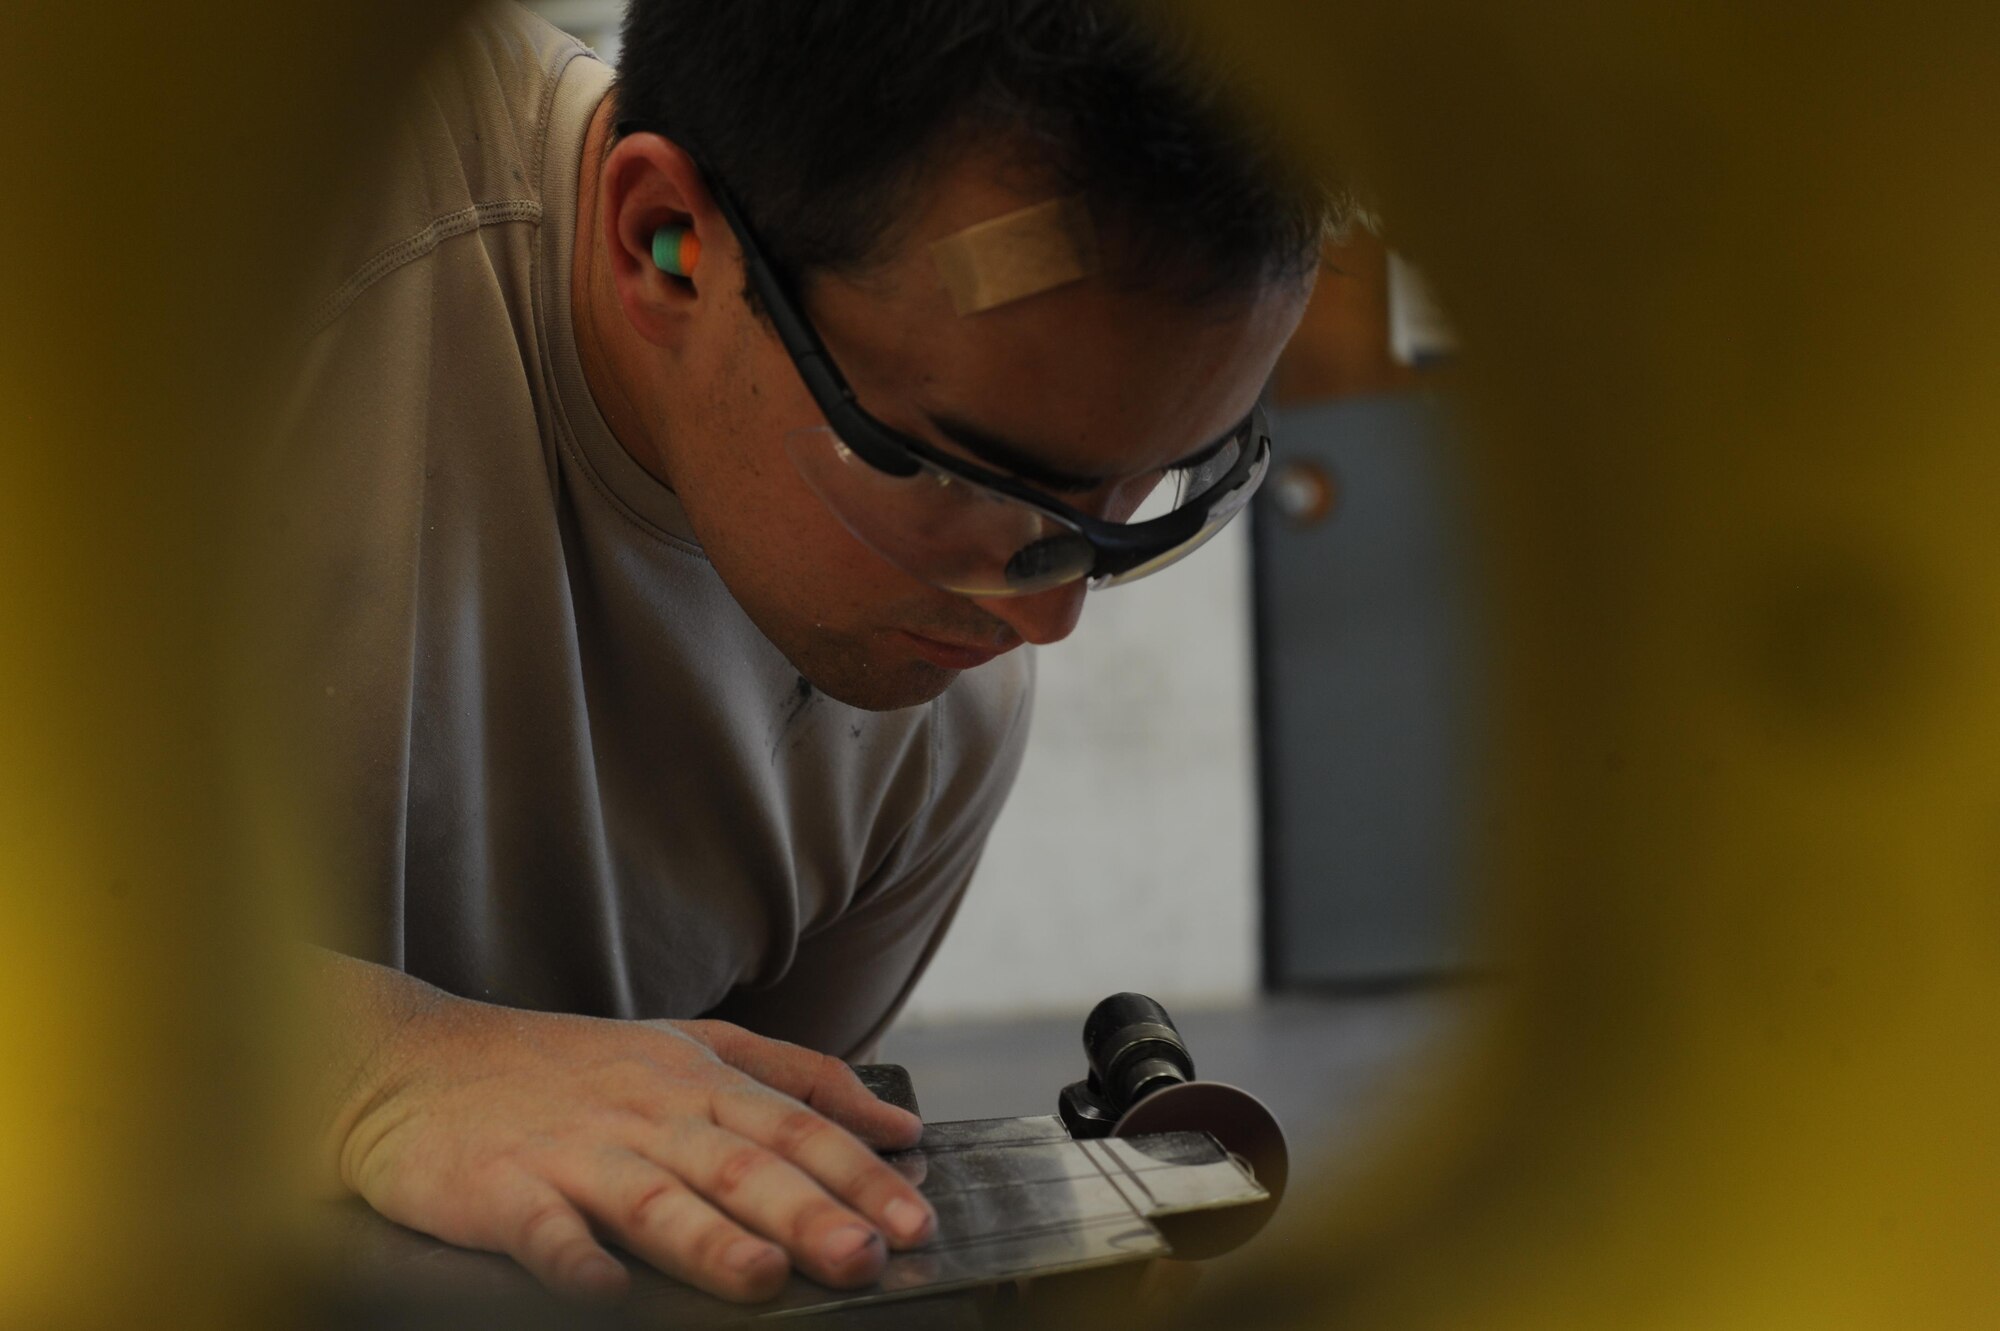 U.S. Air Force Airman 1st Class Christopher Briggs, 7th Equipment Maintenance Squadron aircraft structural apprentice, grinds down a piece of sheet metal July 7, 2016, at Dyess Air Force Base, Texas. Airmen of the sheet metal shop learn to sculpt metal to the exact size or shape needed, down to the millimeter, to ensure repairs of an aircraft are seamless. (U.S. Air Force photo by Airman 1st Class Rebecca Van Syoc)